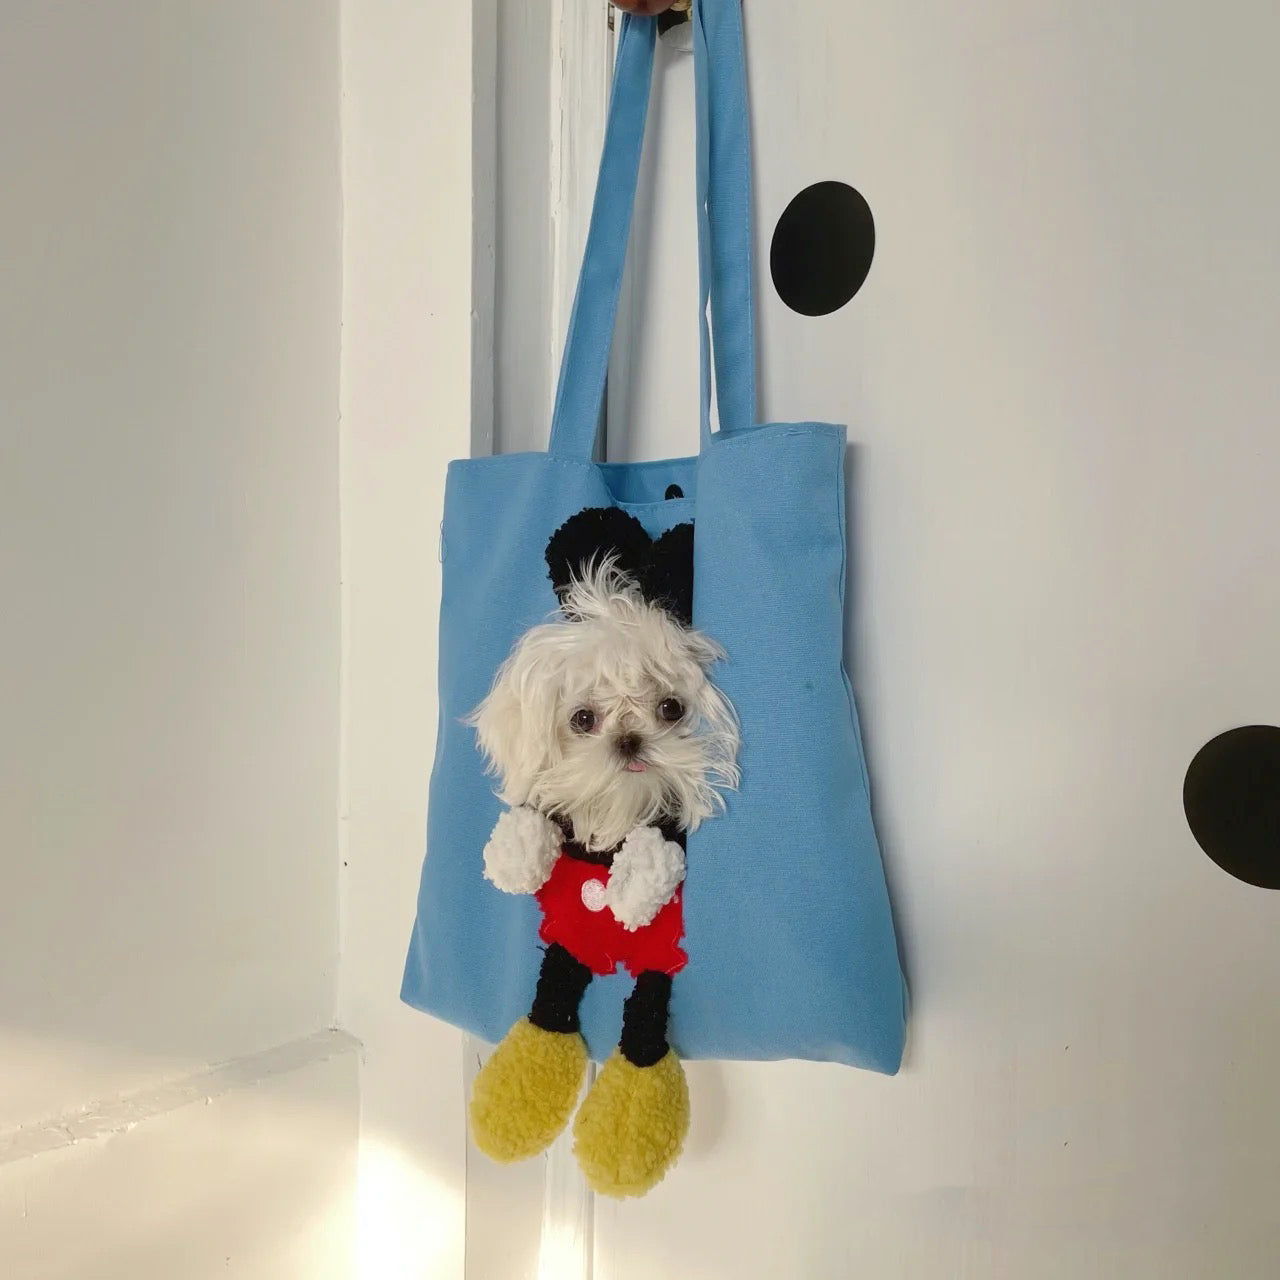 Pet Tote Bag Carrier with Plush Micky Mouse for Cats & Dogs